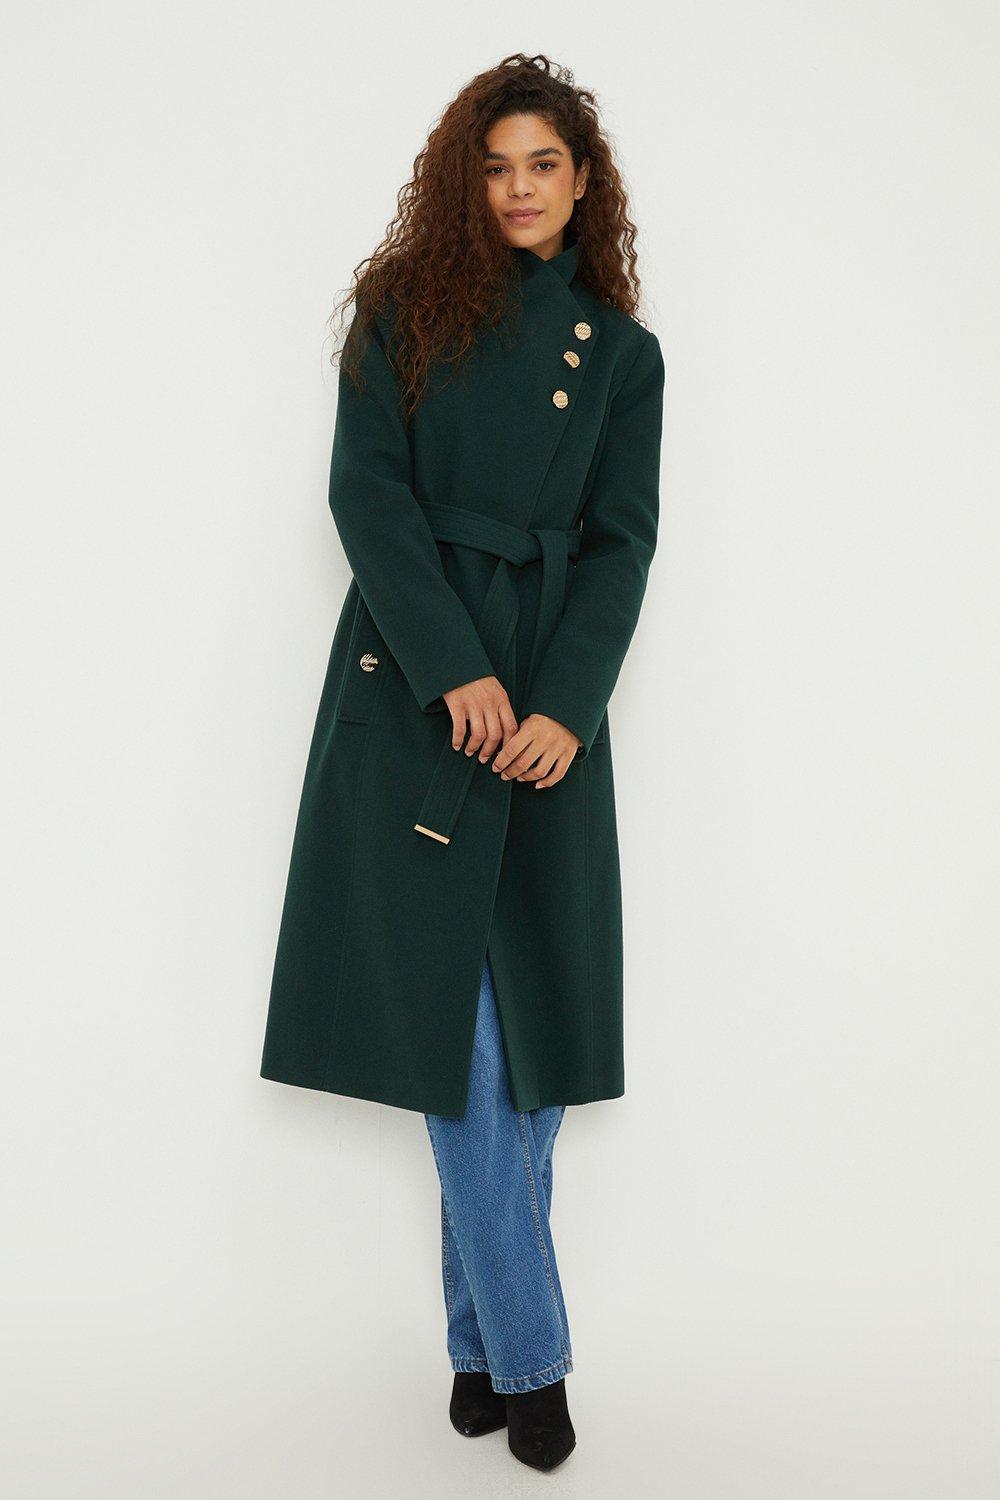 Women’s Tall Funnel Neck Coat - forest - L